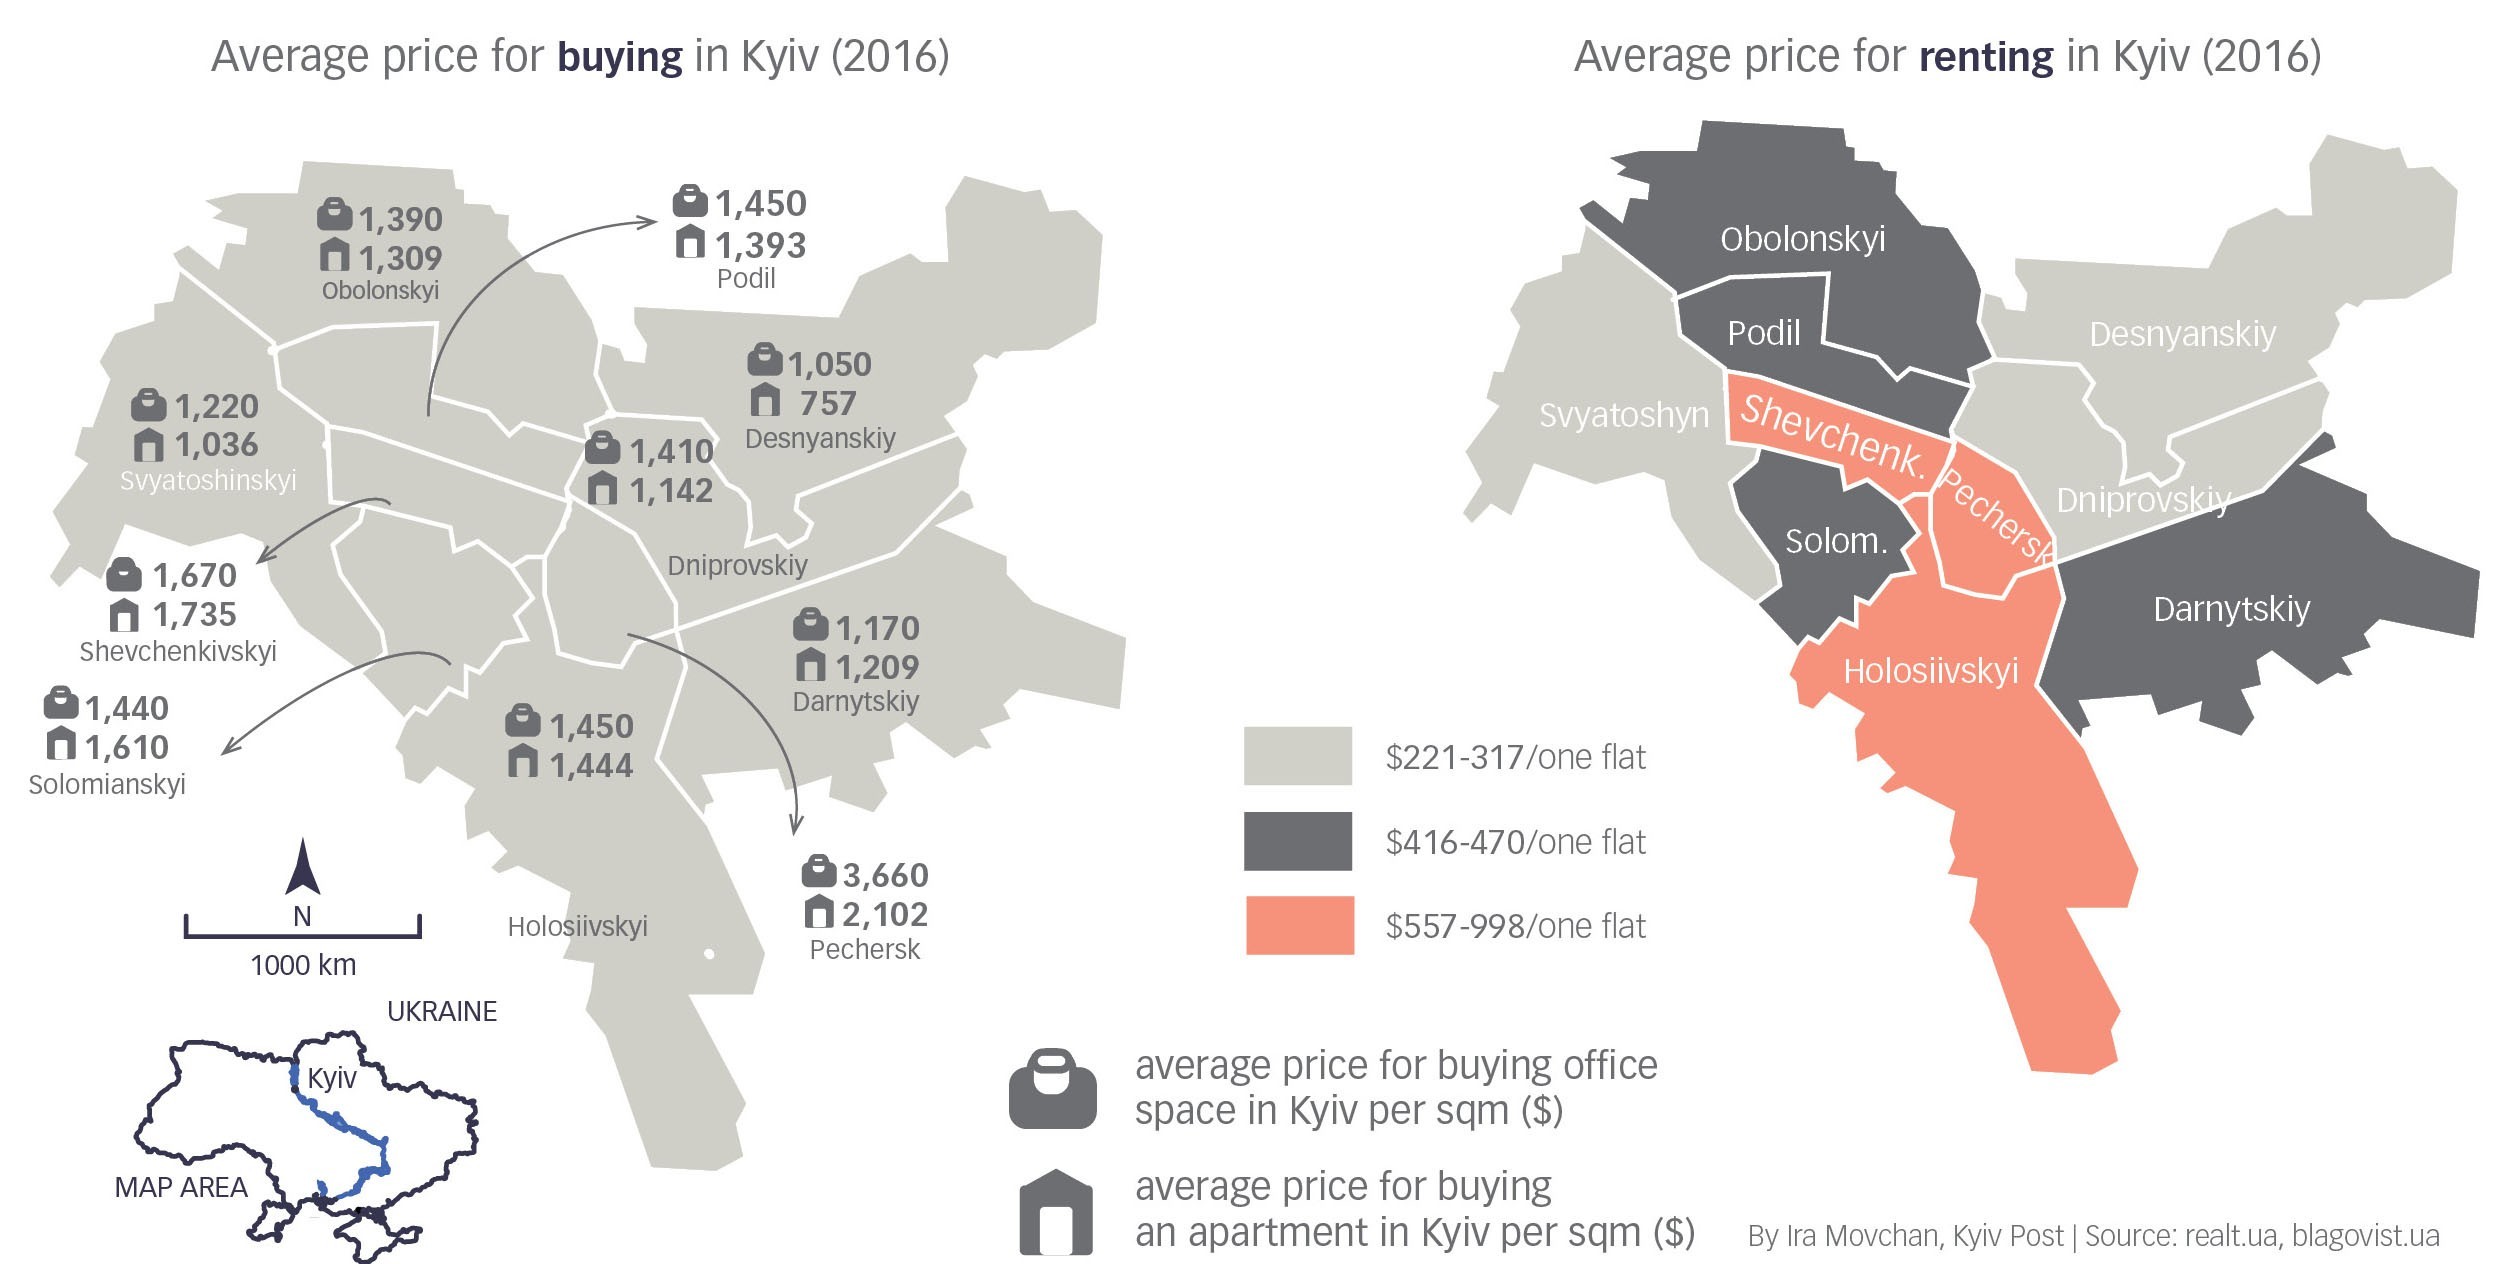 Kyiv’s Pechersk neighborhood remains the most expensive in all categories -- buying offices or apartments and renting apartments, whlle the outer regions of the capital are cheaper.